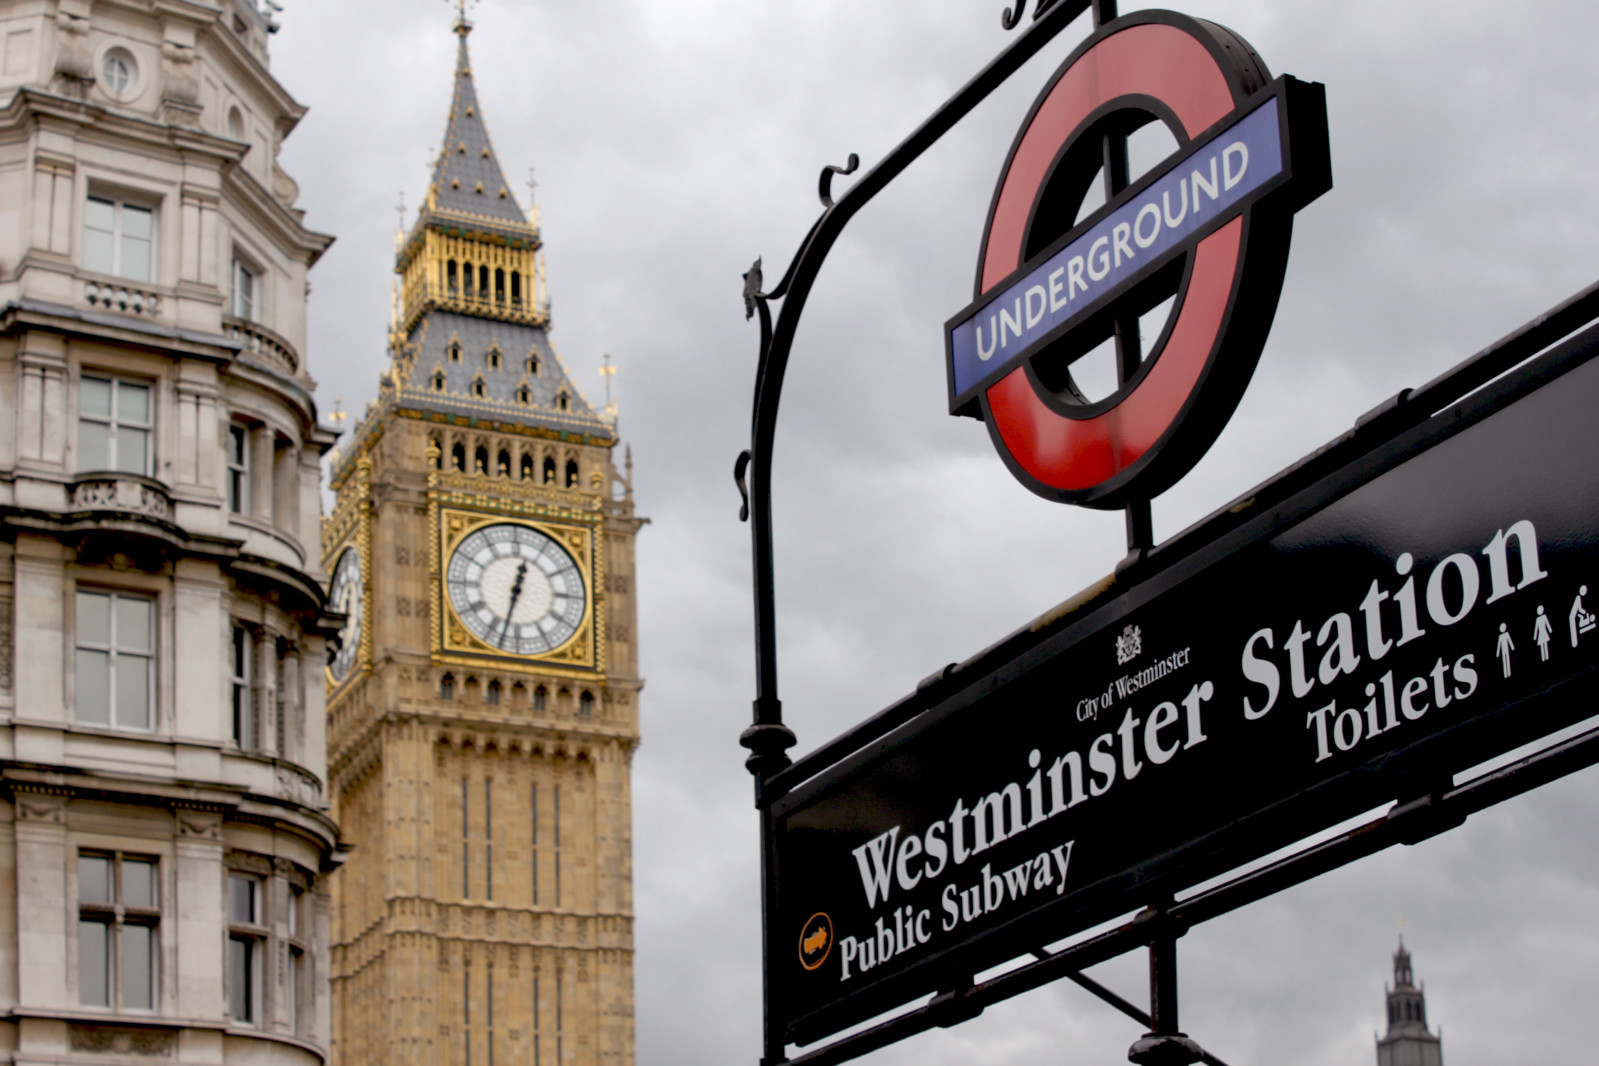 What To Expect From October's Westminster Trip